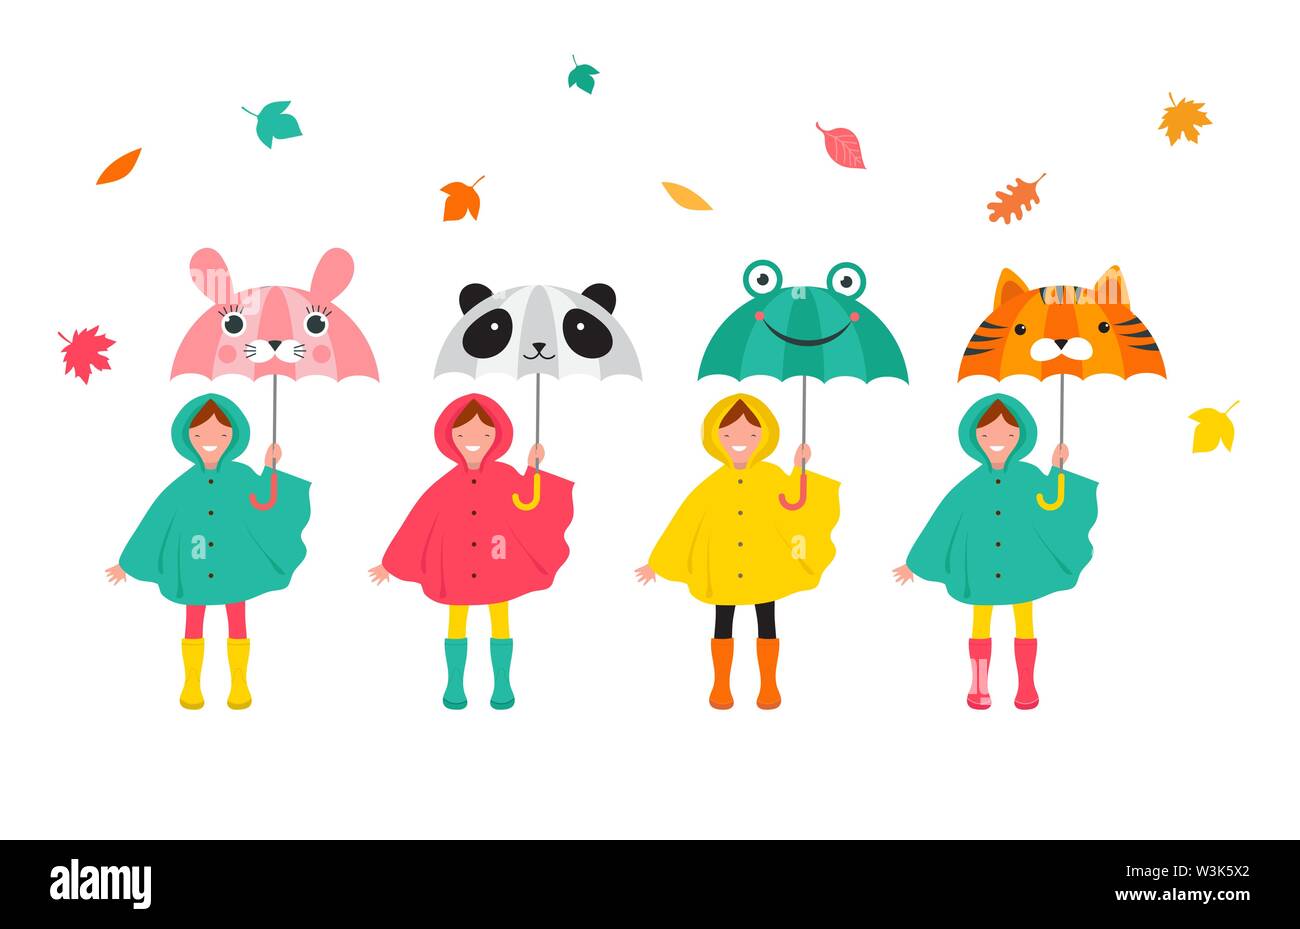 Autumn, fall scene with various cute kids, boys and girls in colorful raincoats having fun, playing with autumn leaves, holding a funny umbrellas. Col Stock Vector